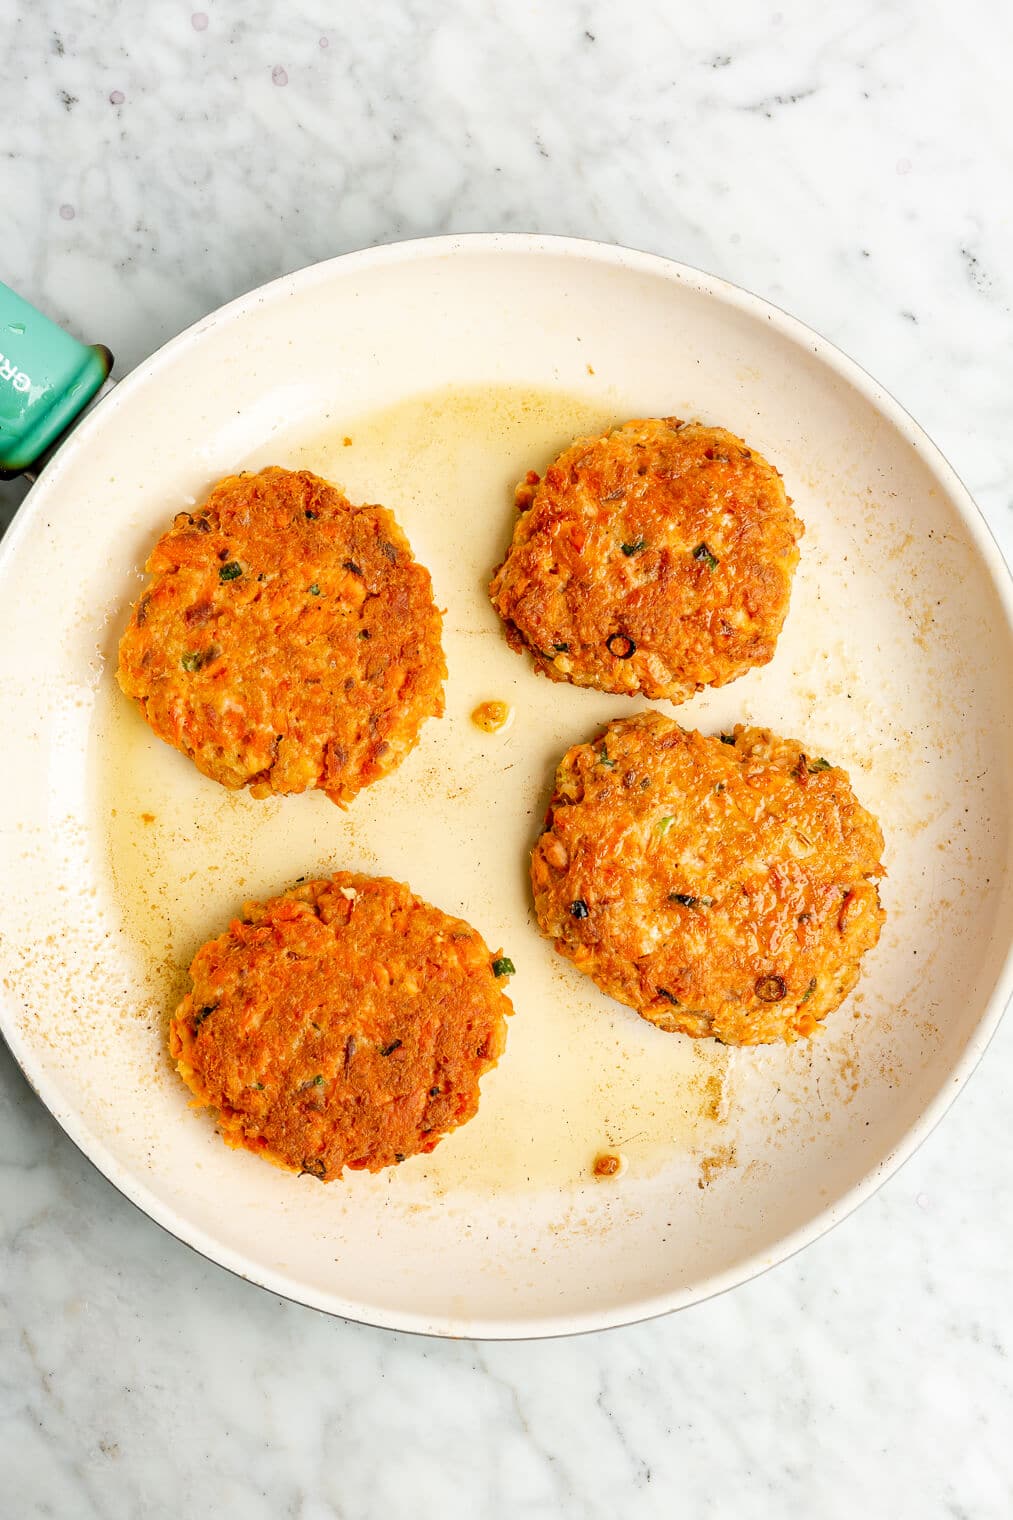 4 salmon cakes cooking on a ceramic skillet.